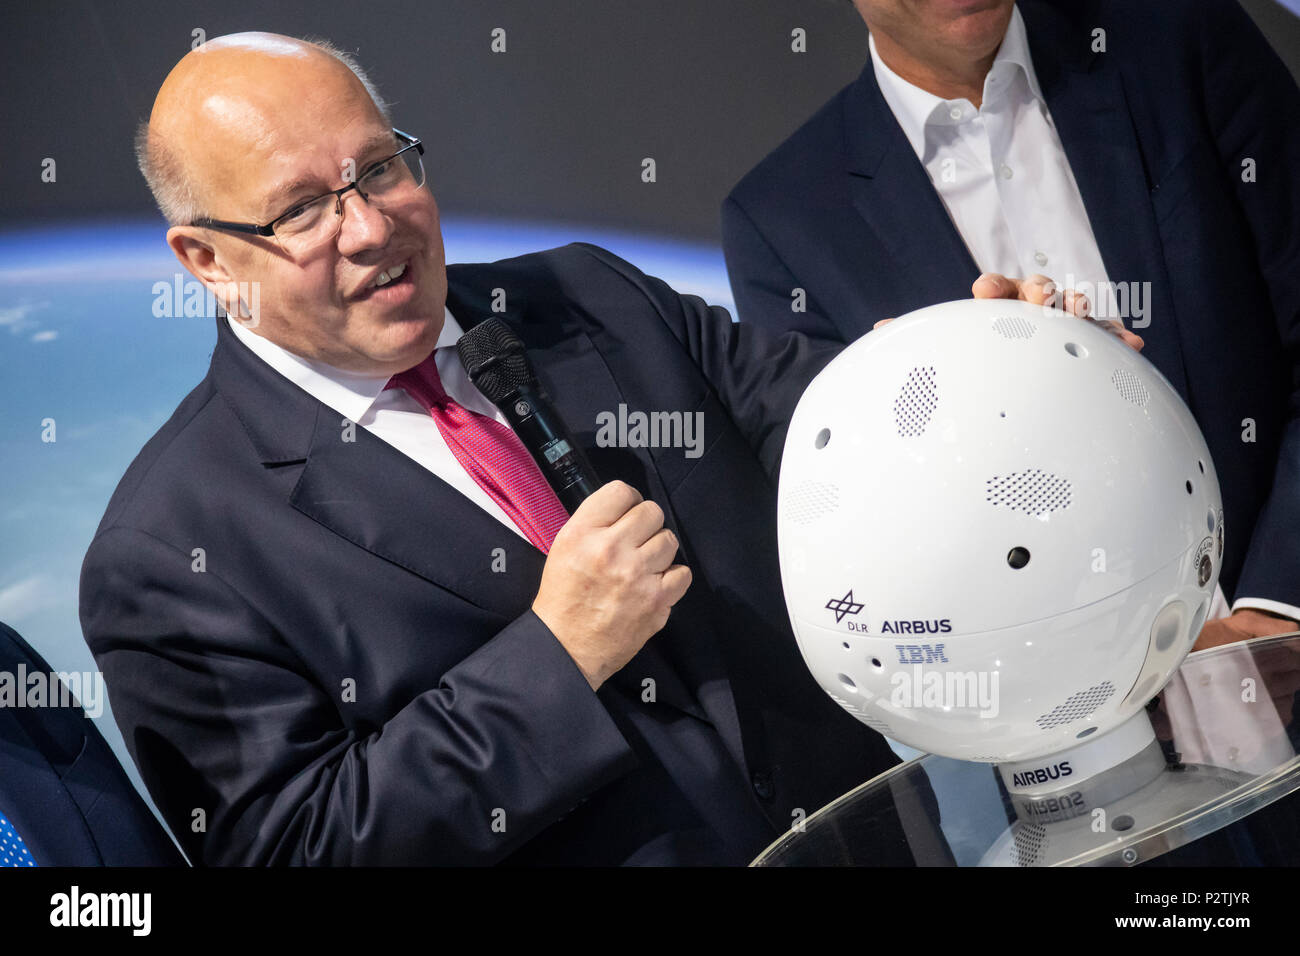 Hannover, Germany. 12th June, 2018. IT-expo CEBIT 2018 opening walk with Peter Altmaier, Federal Minister for Economic Affairs and Energy Germany. Here at IBM booth, presenting robot CIMON (Crew Interactive Mobile CompaniON), an intelligent, mobile and interactive astronaut assistance system, developed by Airbus on behalf of German Aerospace Center (DLR), using IBM Watson technology, tested on ISS as part of Horizons mission of European Space Agency (ESA). Credit: Christian Lademann Stock Photo